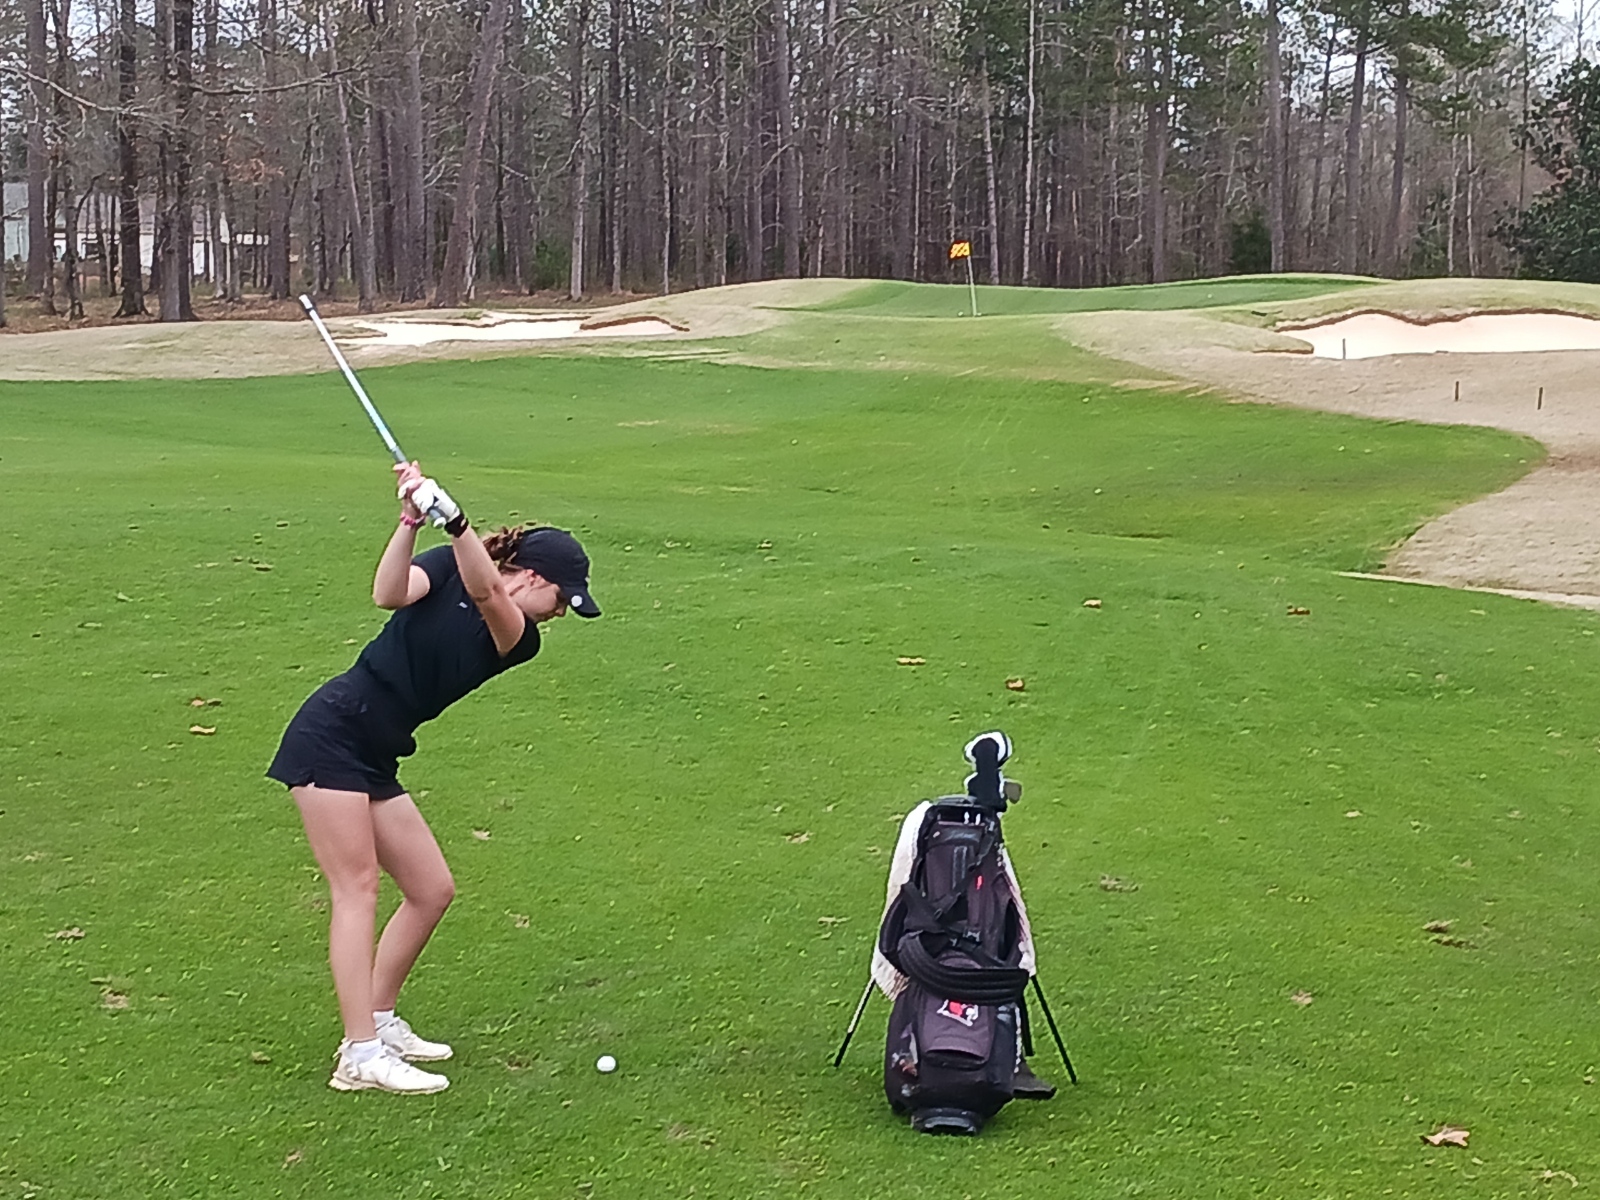 Women's Golf competes at the LTU Spring Break Invitational to open Spring season